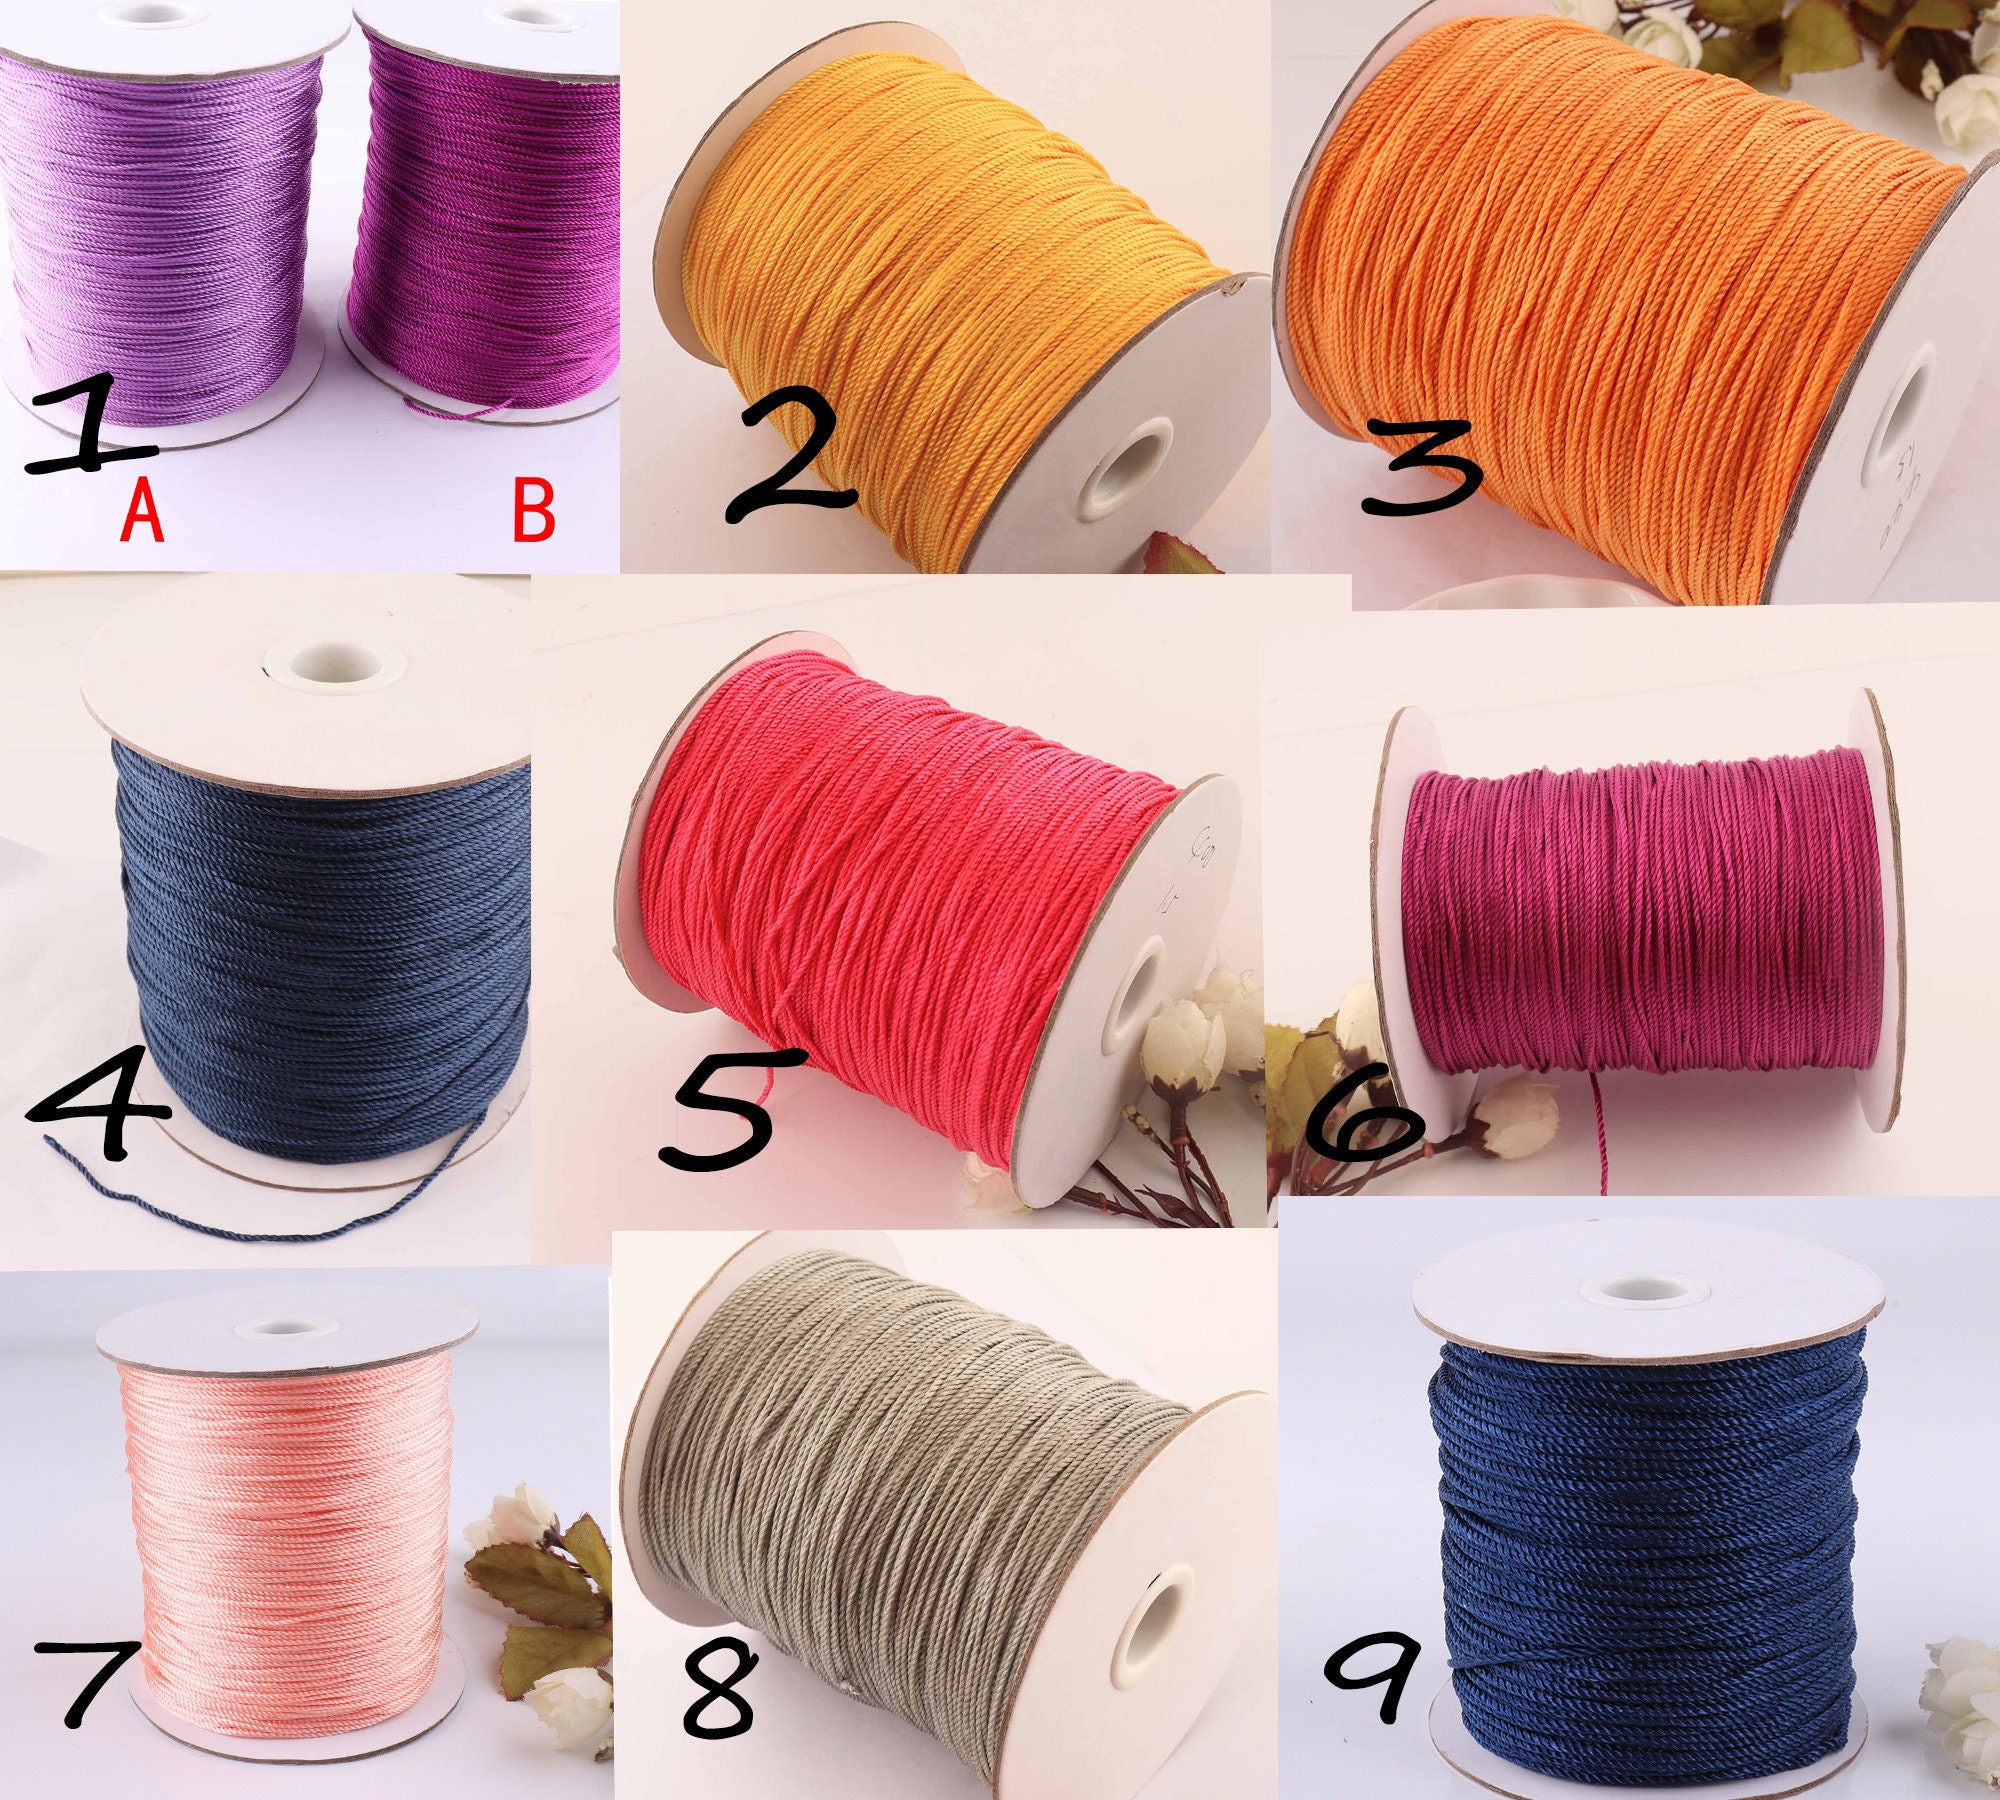 Plastic Yarn Needles;Plastic Needles;Plastic Embroidery Needle;Plastic  Sewing Needles(3.5,60pcs) Especially Suitable for Beginners to Learn  Sewing